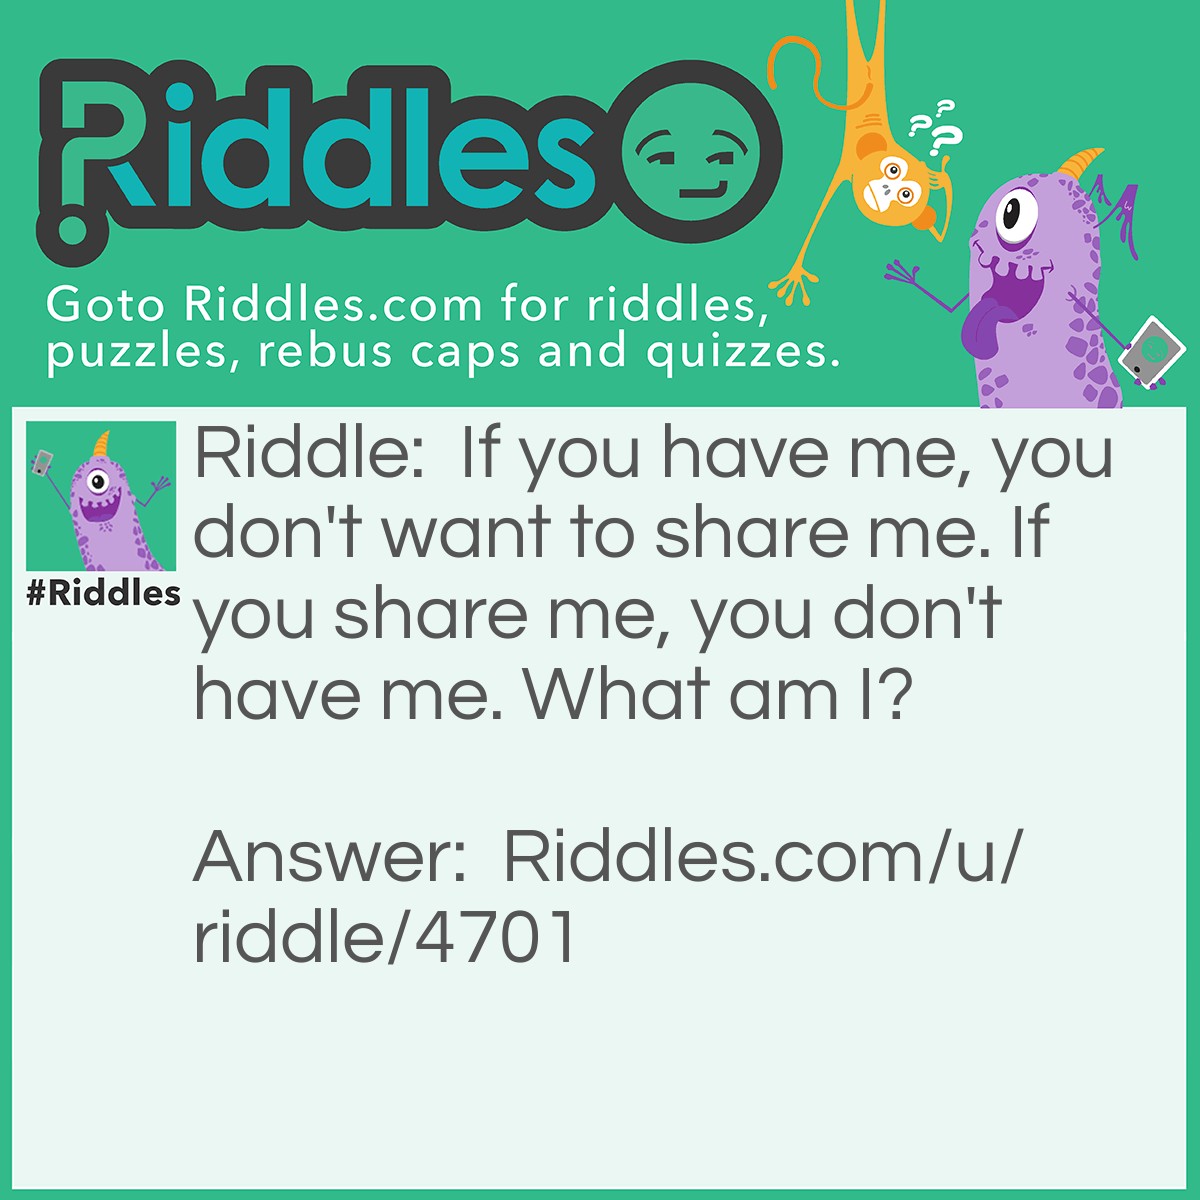 Riddle: If you have me, you don't want to share me. If you share me, you don't have me. What am I? Answer: A Secret.